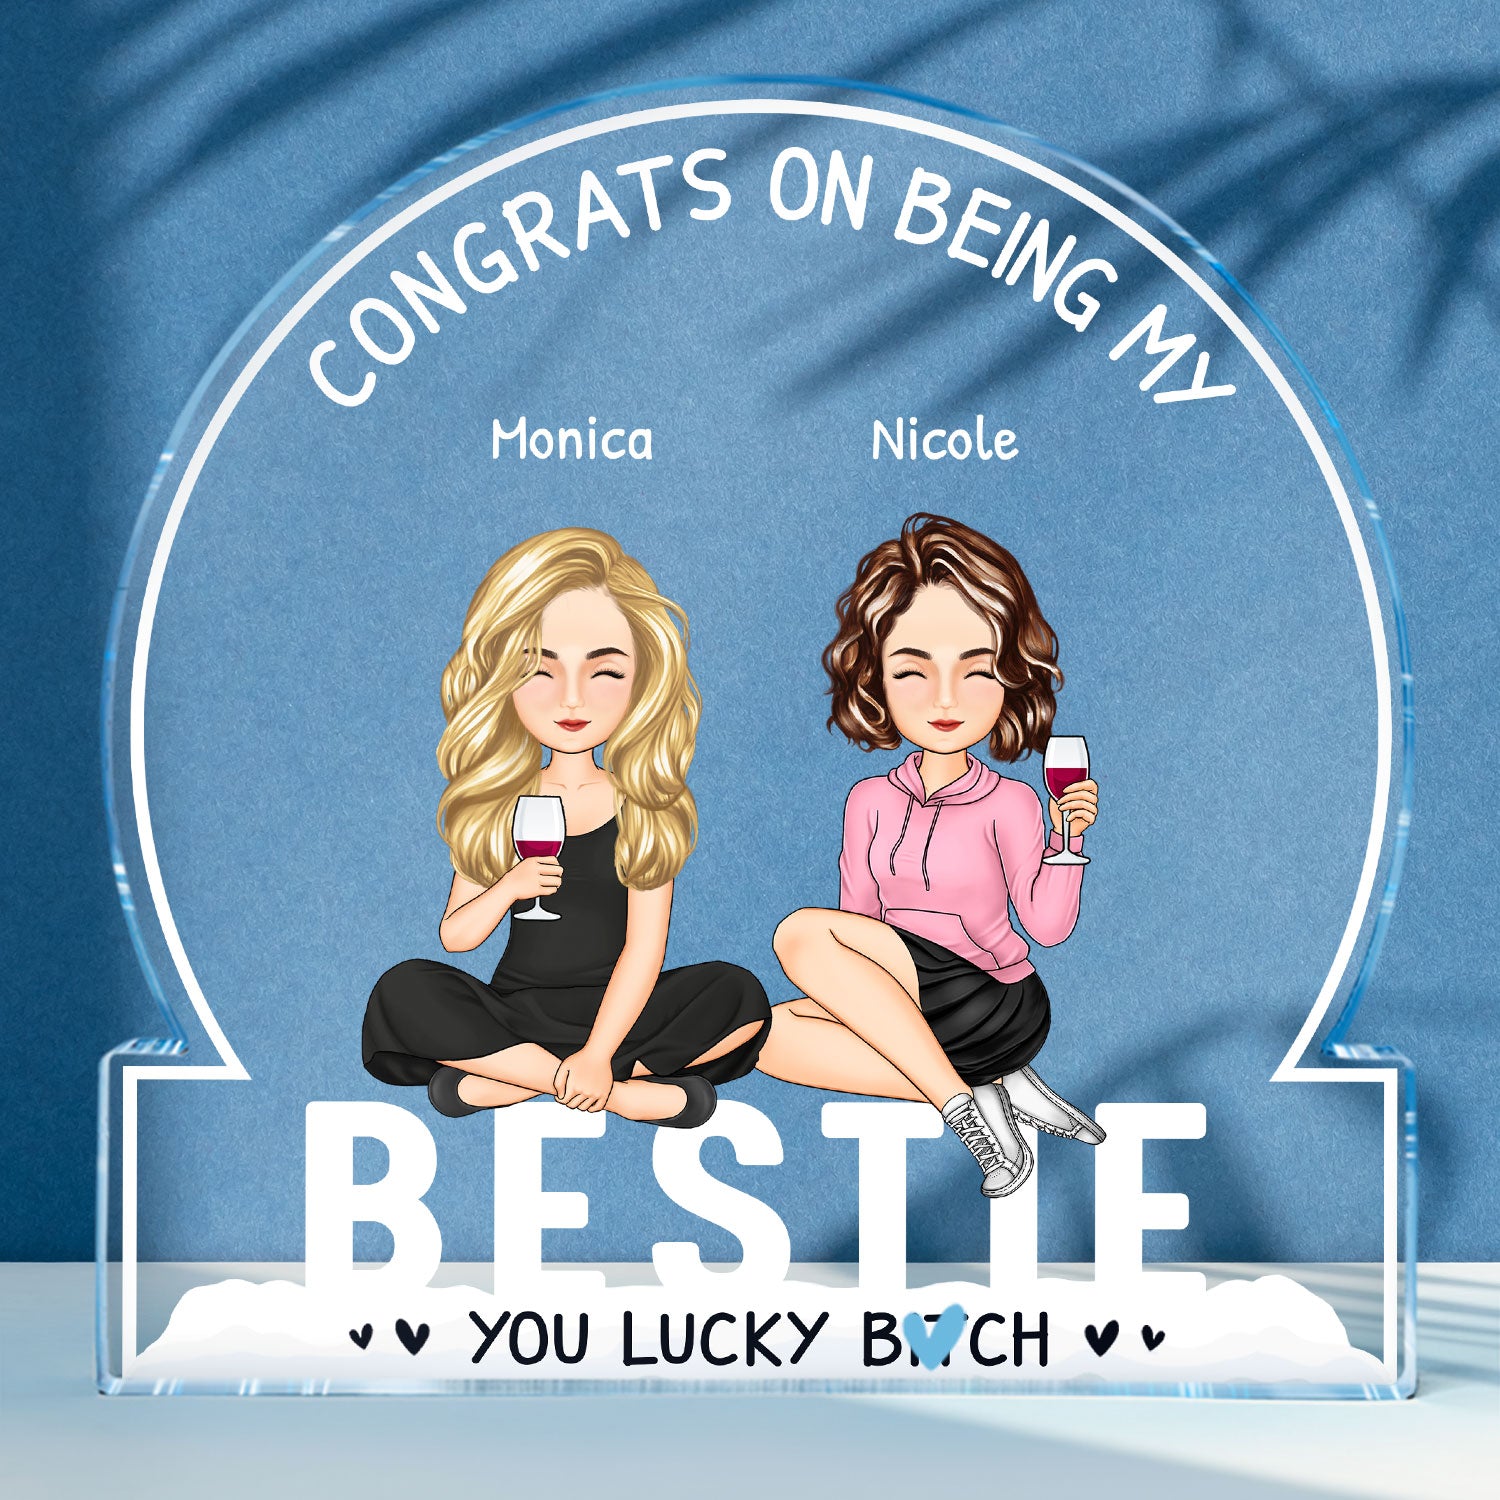 Bestie Congrats On Being My Bestie - Gift For Besties - Personalized Round Shaped Acrylic Plaque